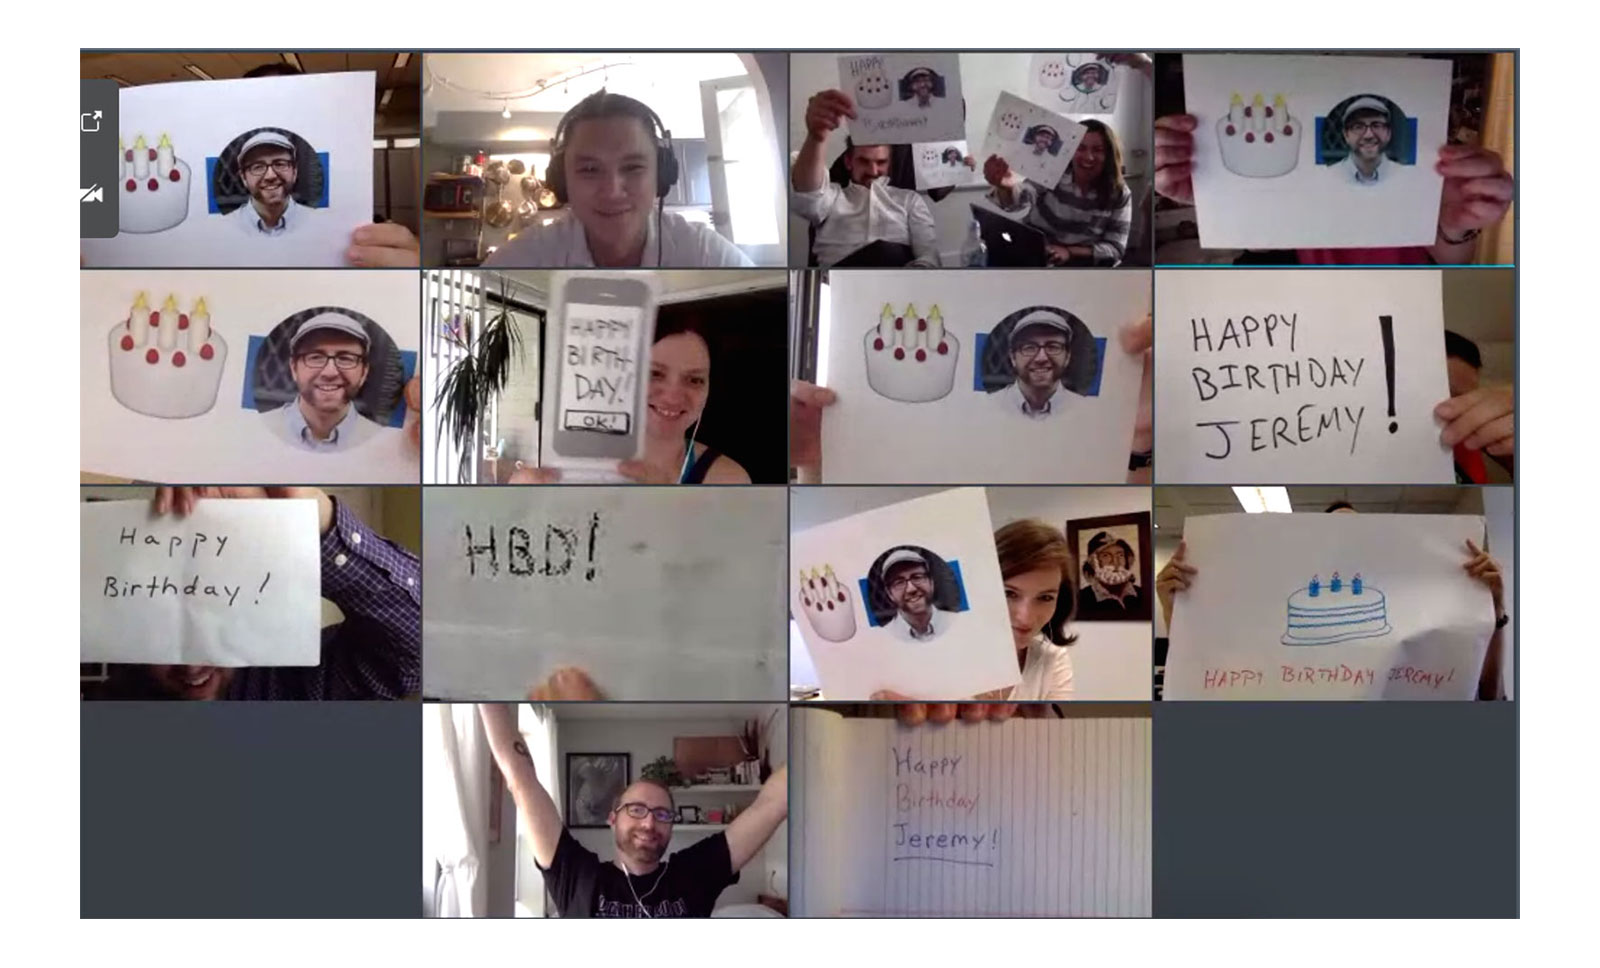 A grid of 18F team members using signs to wish their colleague a happy birthday.